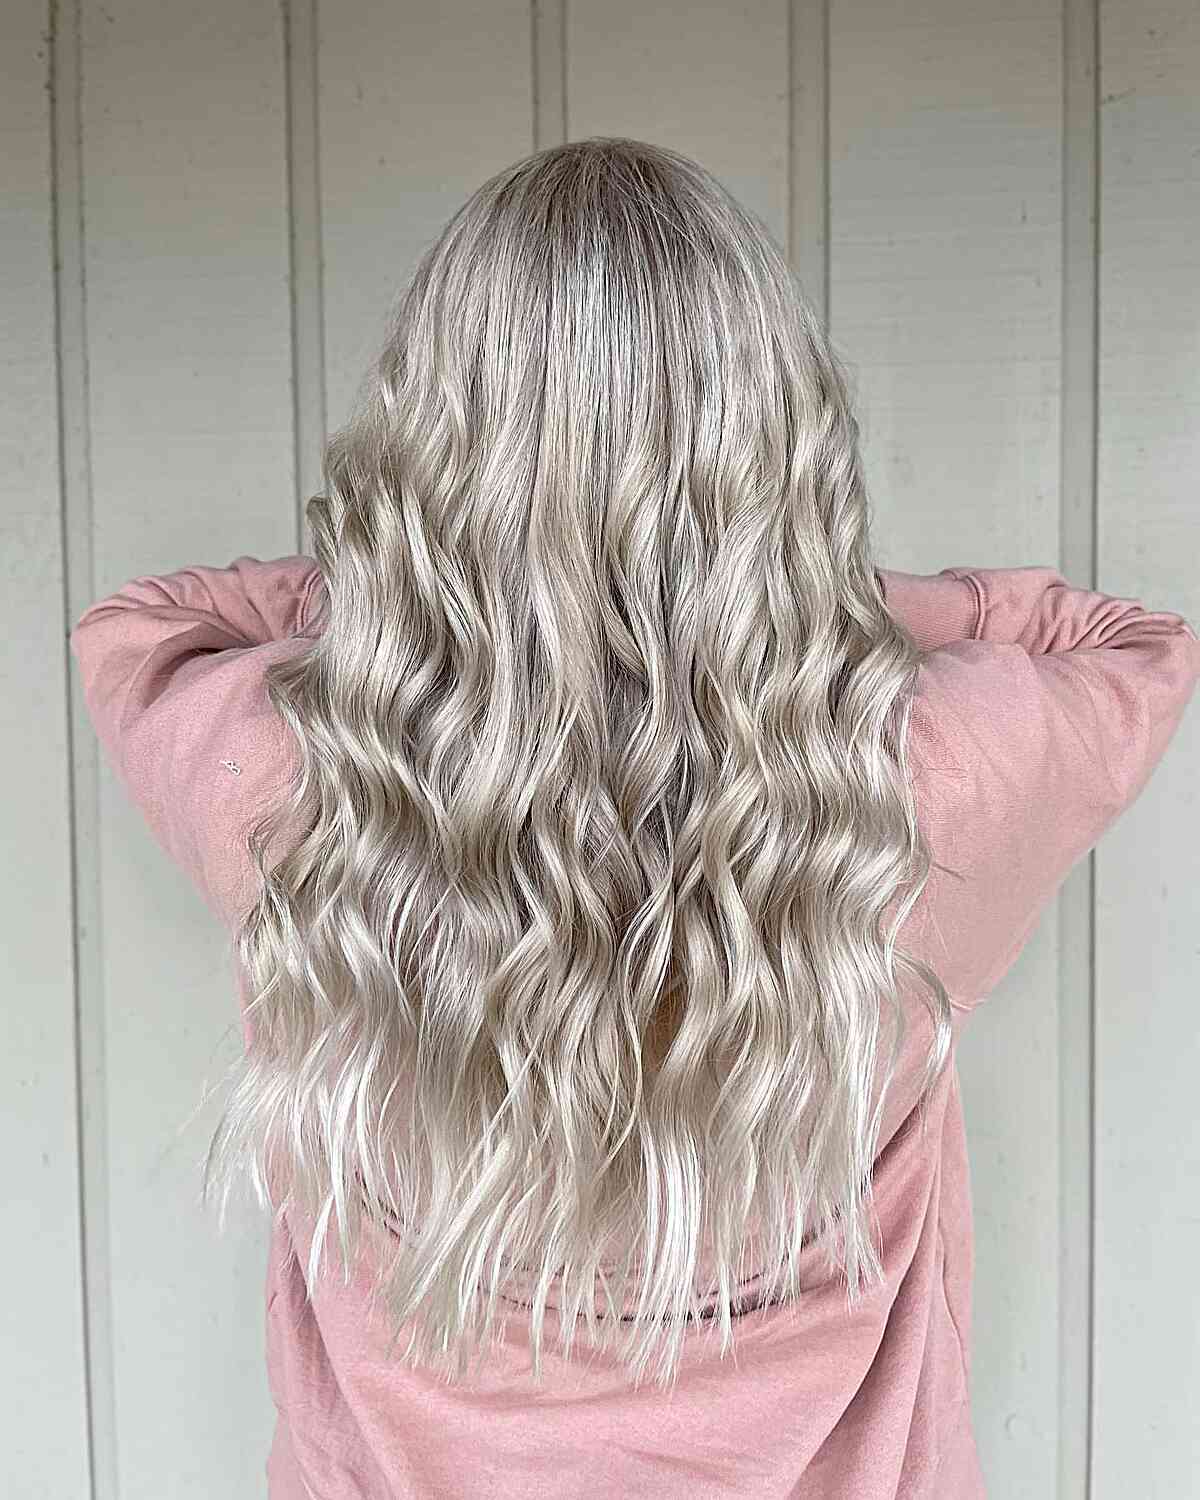 Long Icy Platinum Blonde Hair with Loose Curls